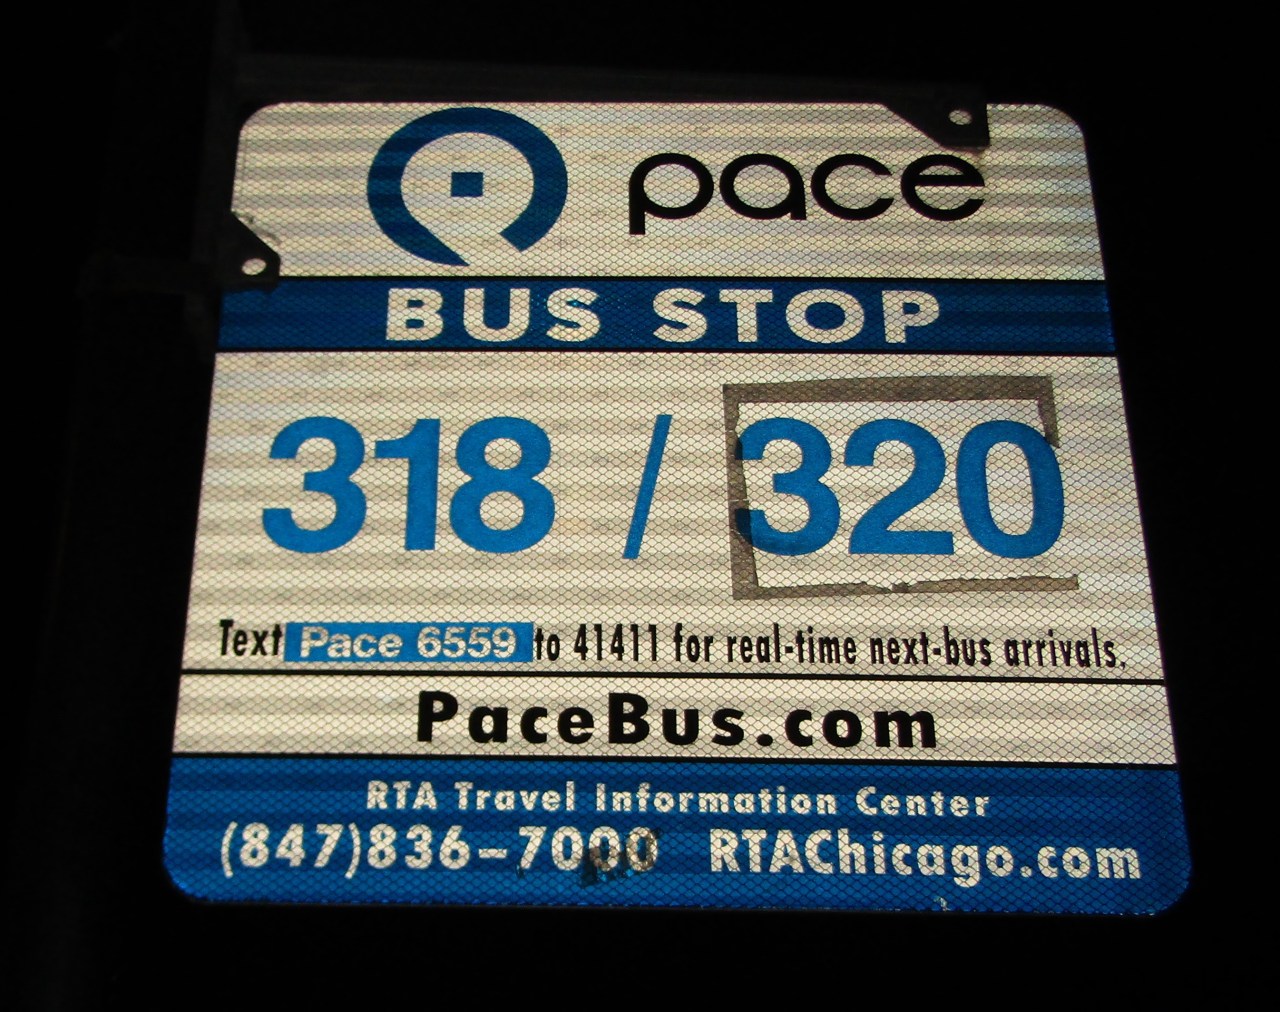 bus stop sign with the suspended Route 320 that I took last night (the signs had “320” part taped over, but, as you can see, it didn’t stick